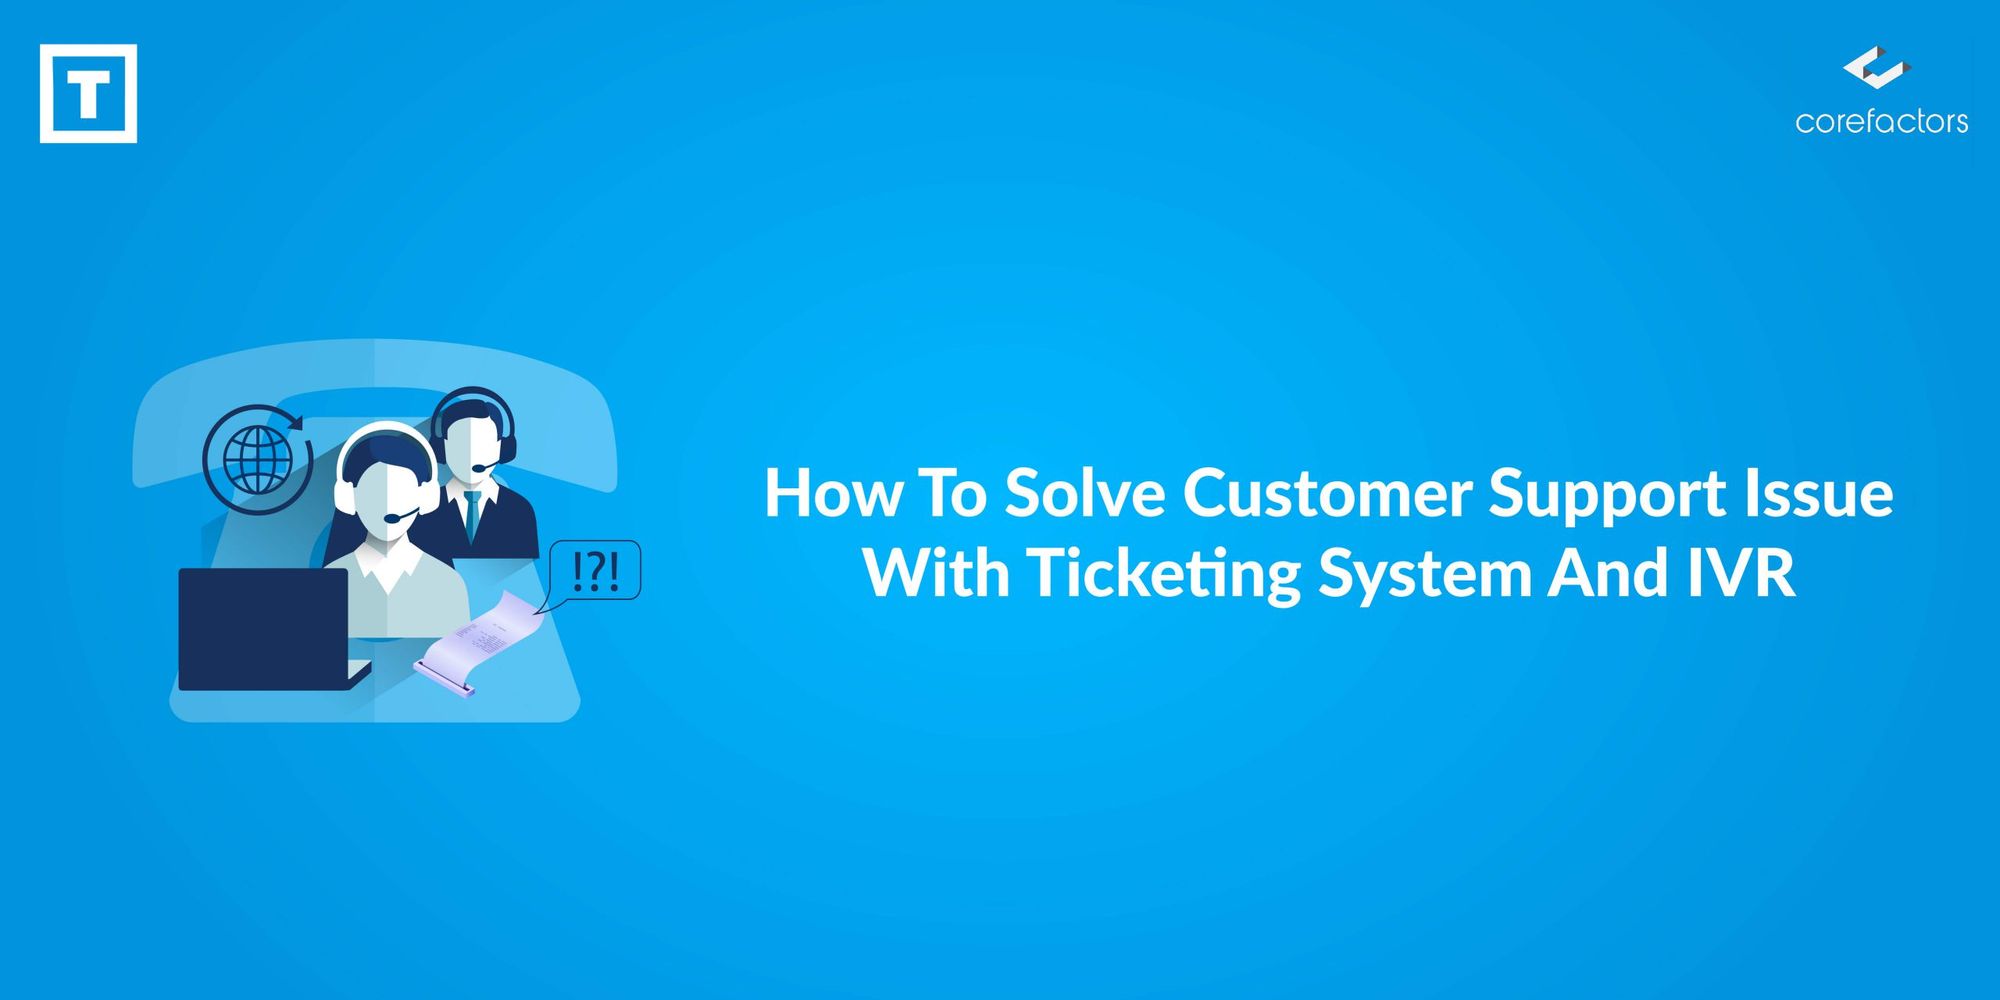 How to Solve Customer Support Issues With Ticketing System And IVR